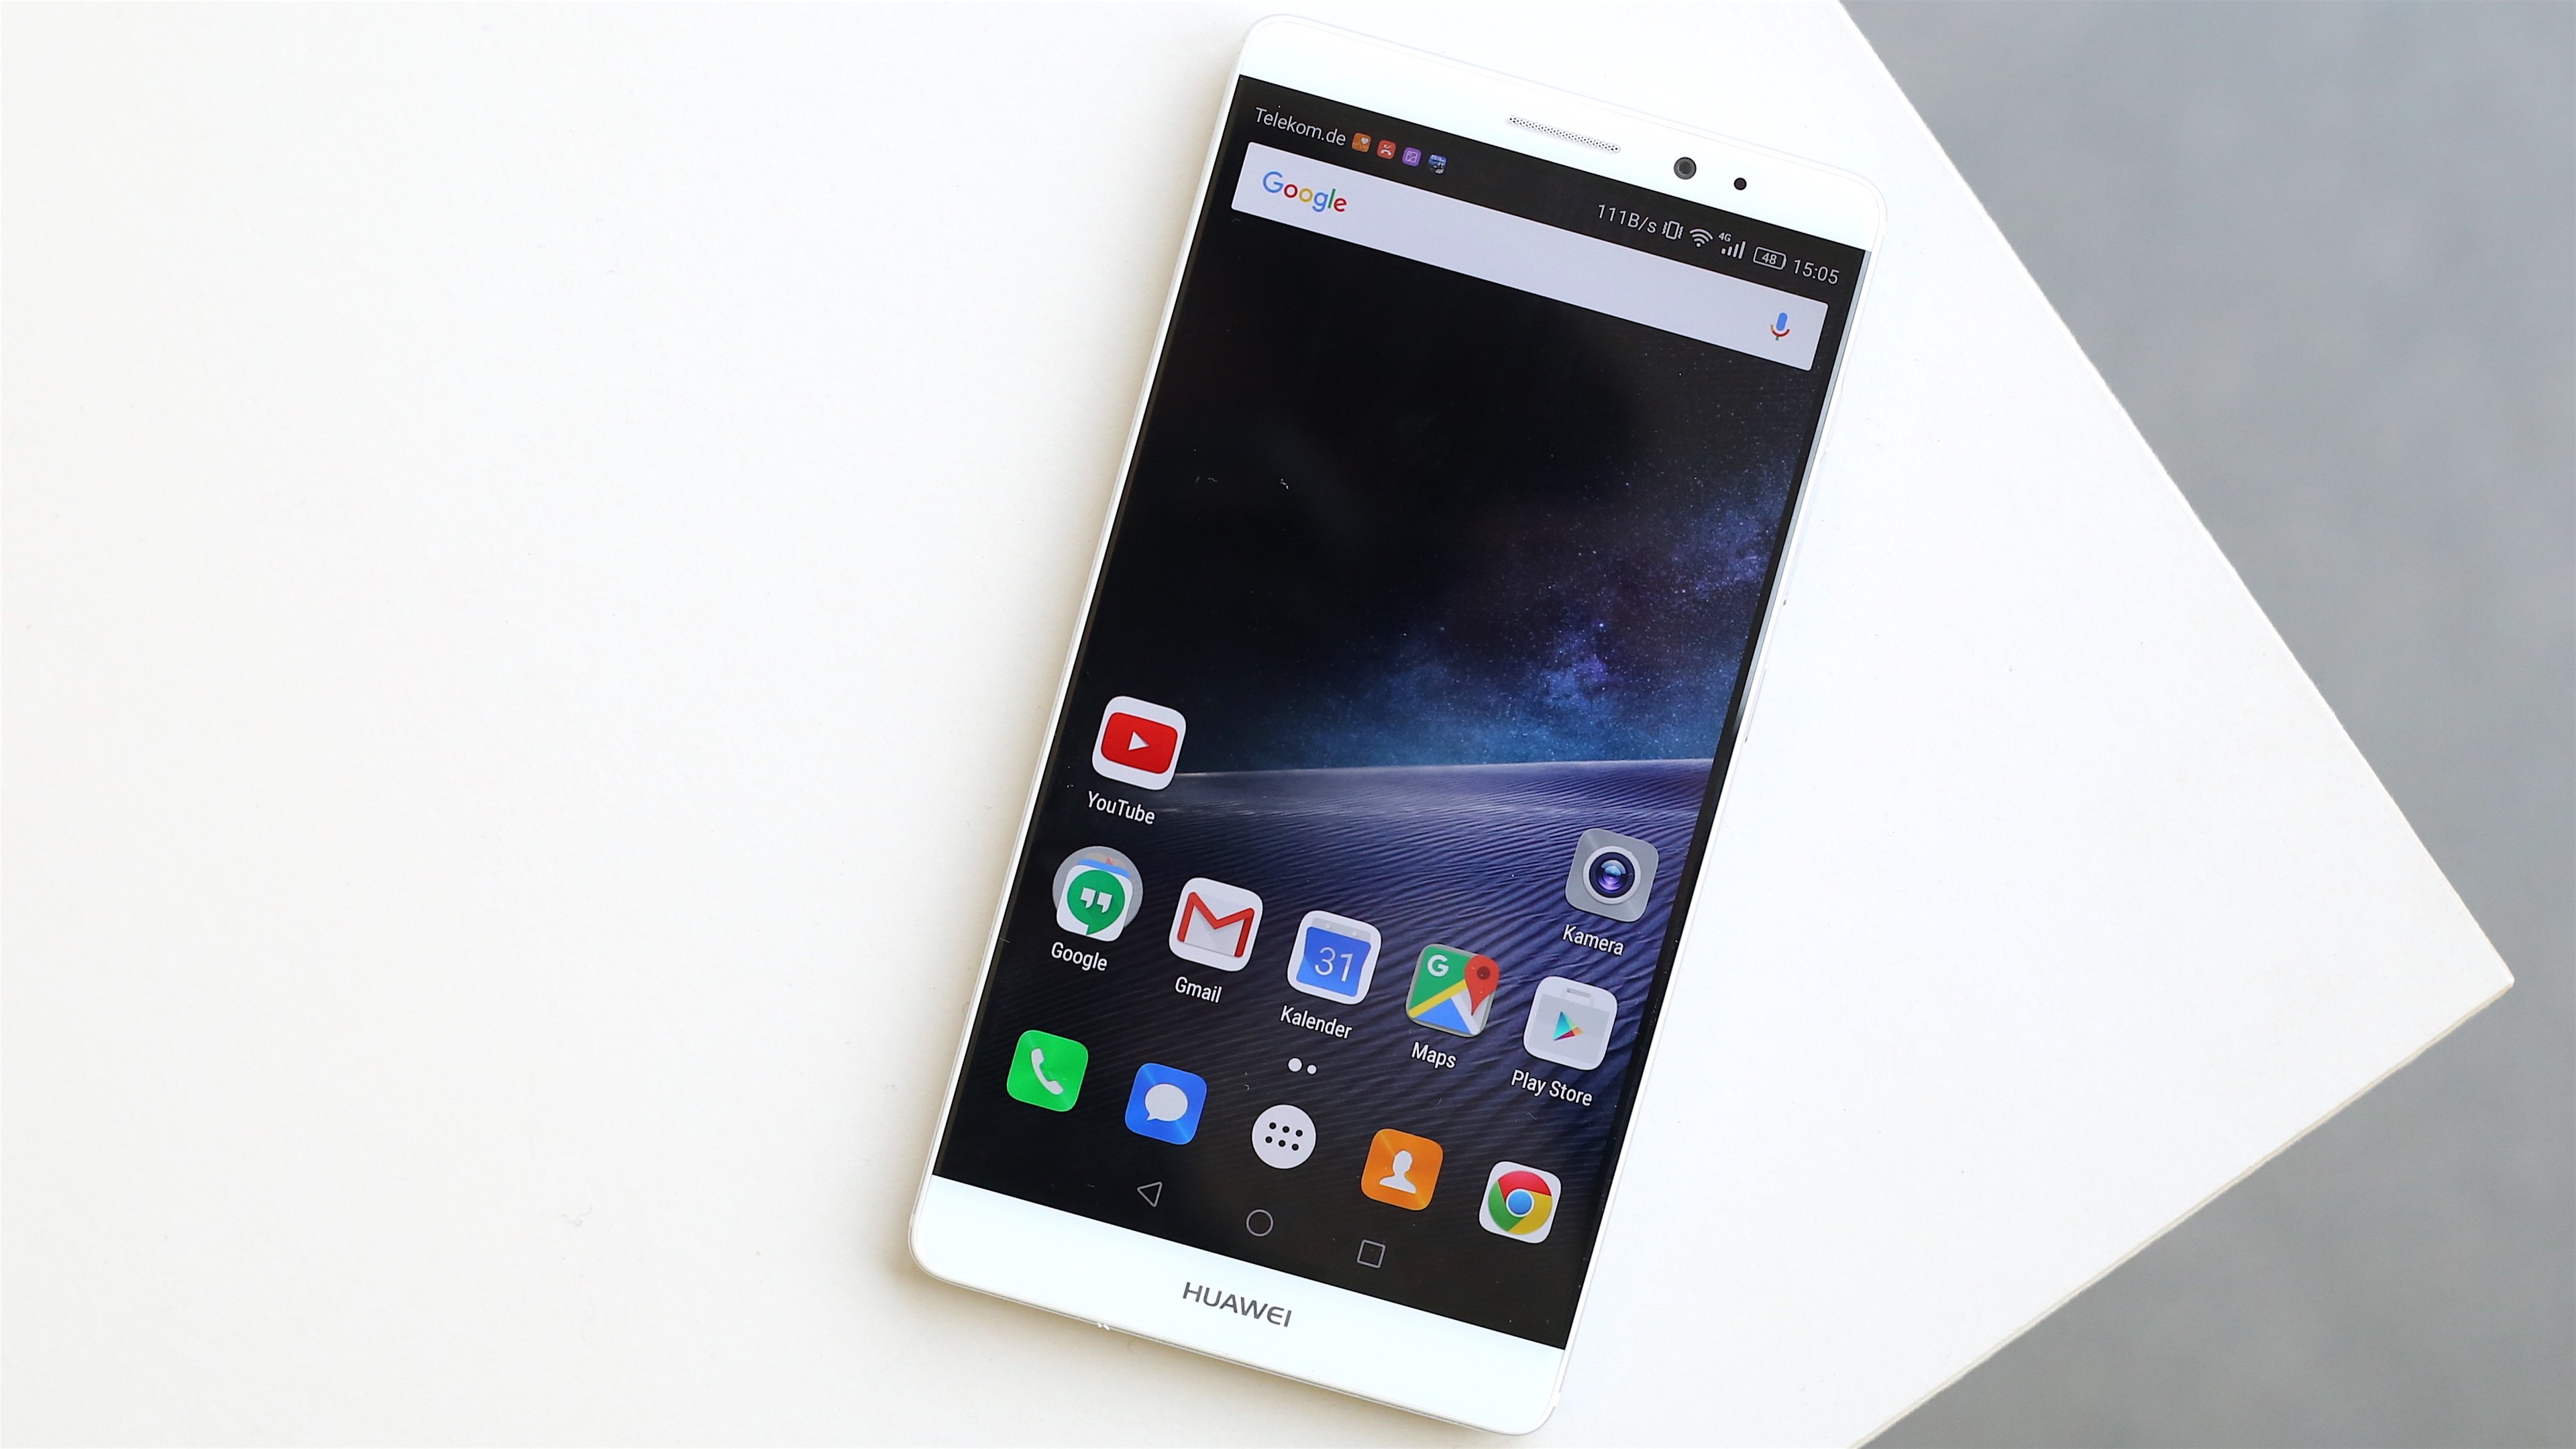 Huawei Mate 8 review, Almost perfect phablet, 3840x2160 4K Desktop